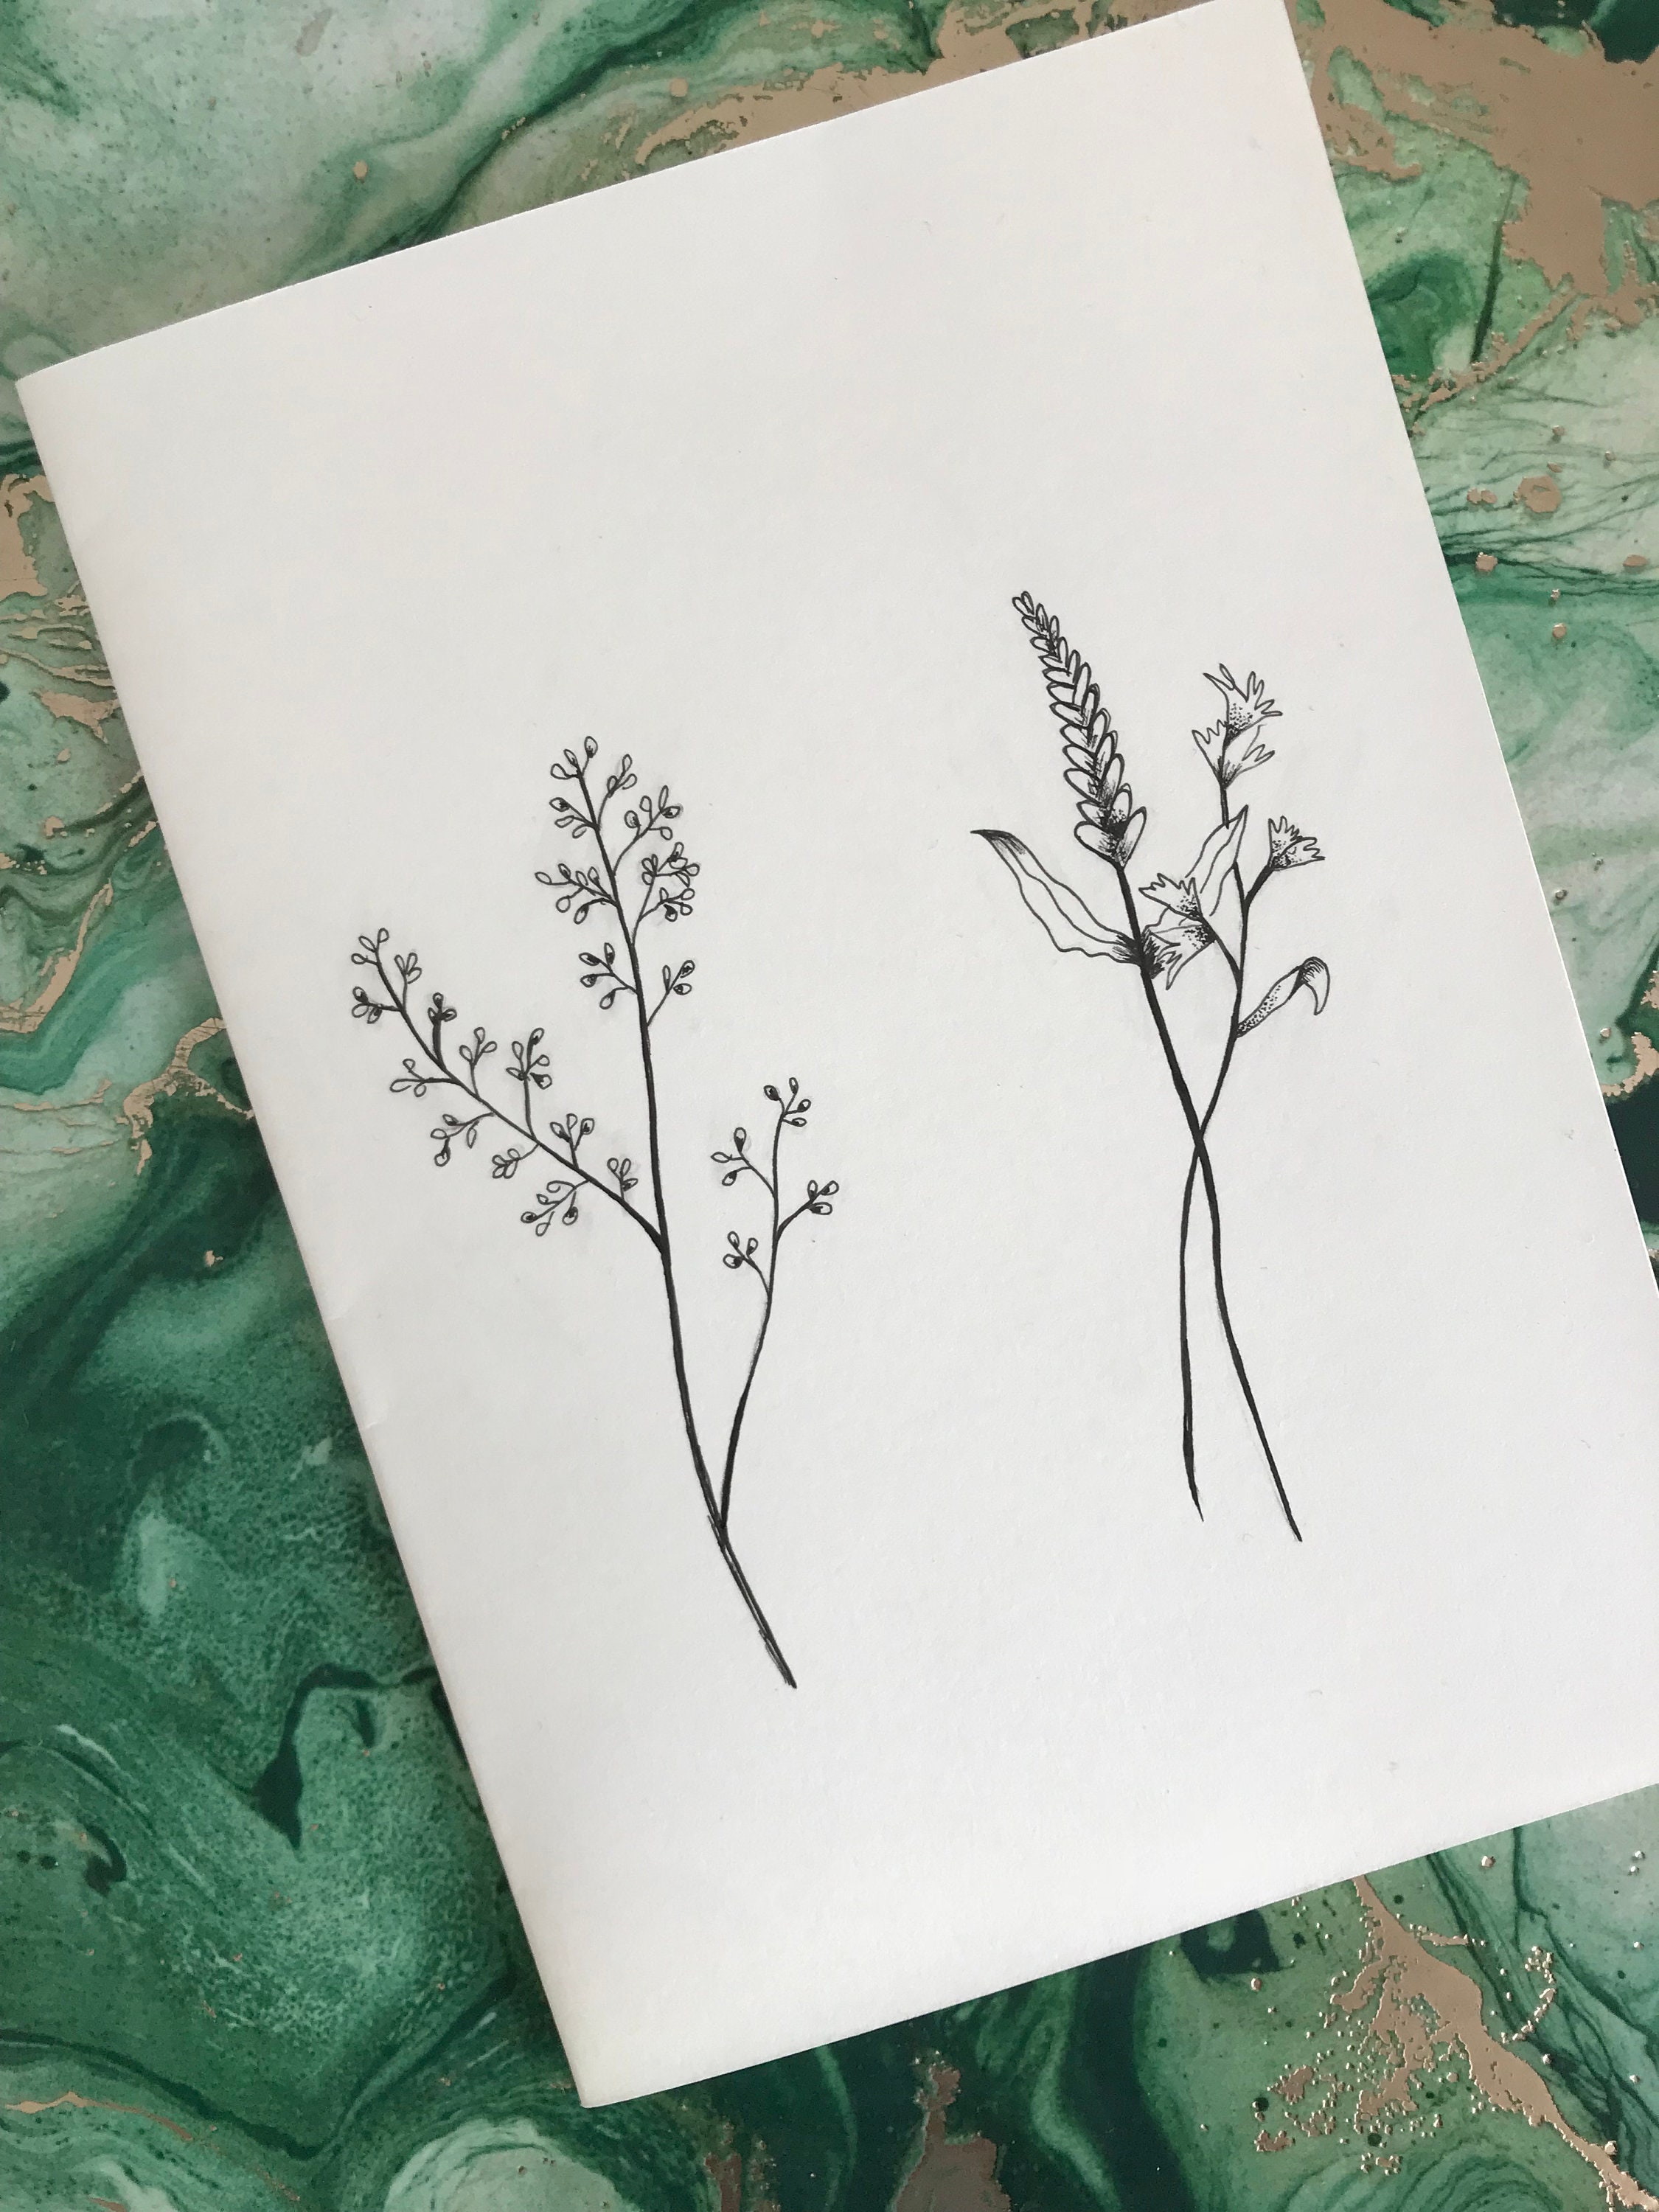 Sketching Flowers: Understand How To Draw Flowers Facing Different Angles |  Emily Armstrong | Skillshare